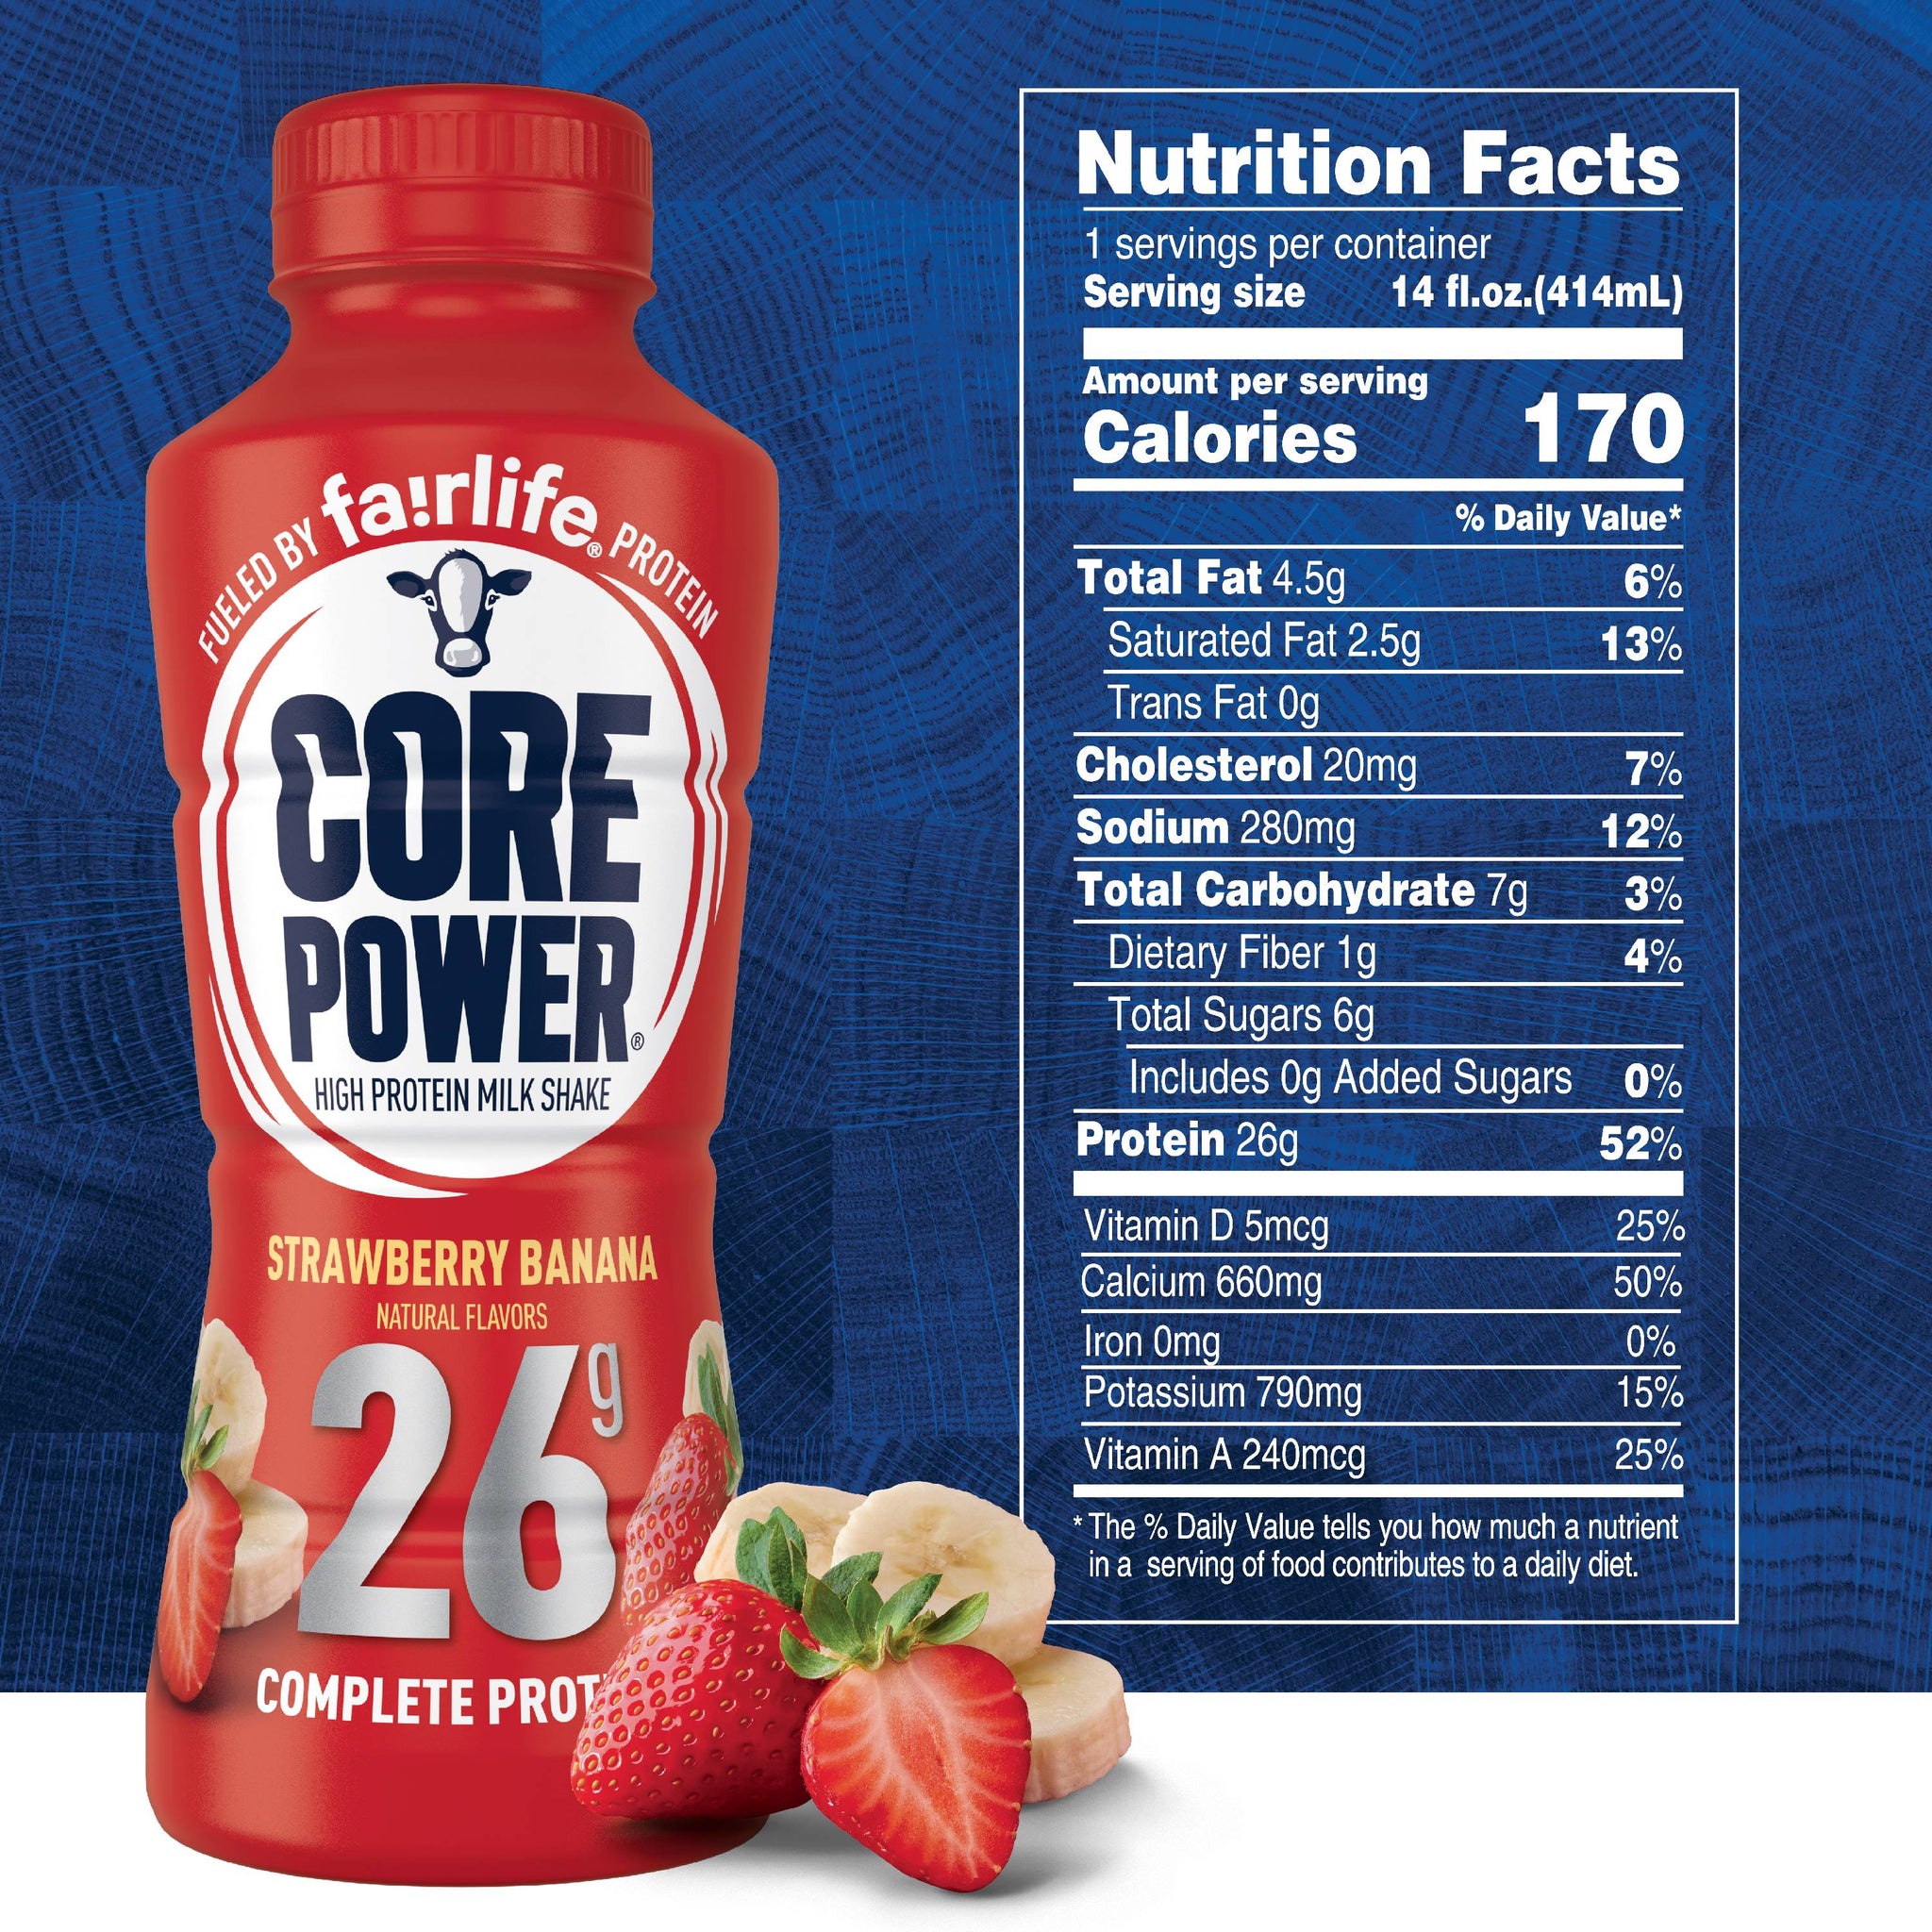 Fairlife Core Power High Protein Shake, Strawberry Banana / 12 / 414ml, Nutrition Facts, SNS Health, Protein Shake